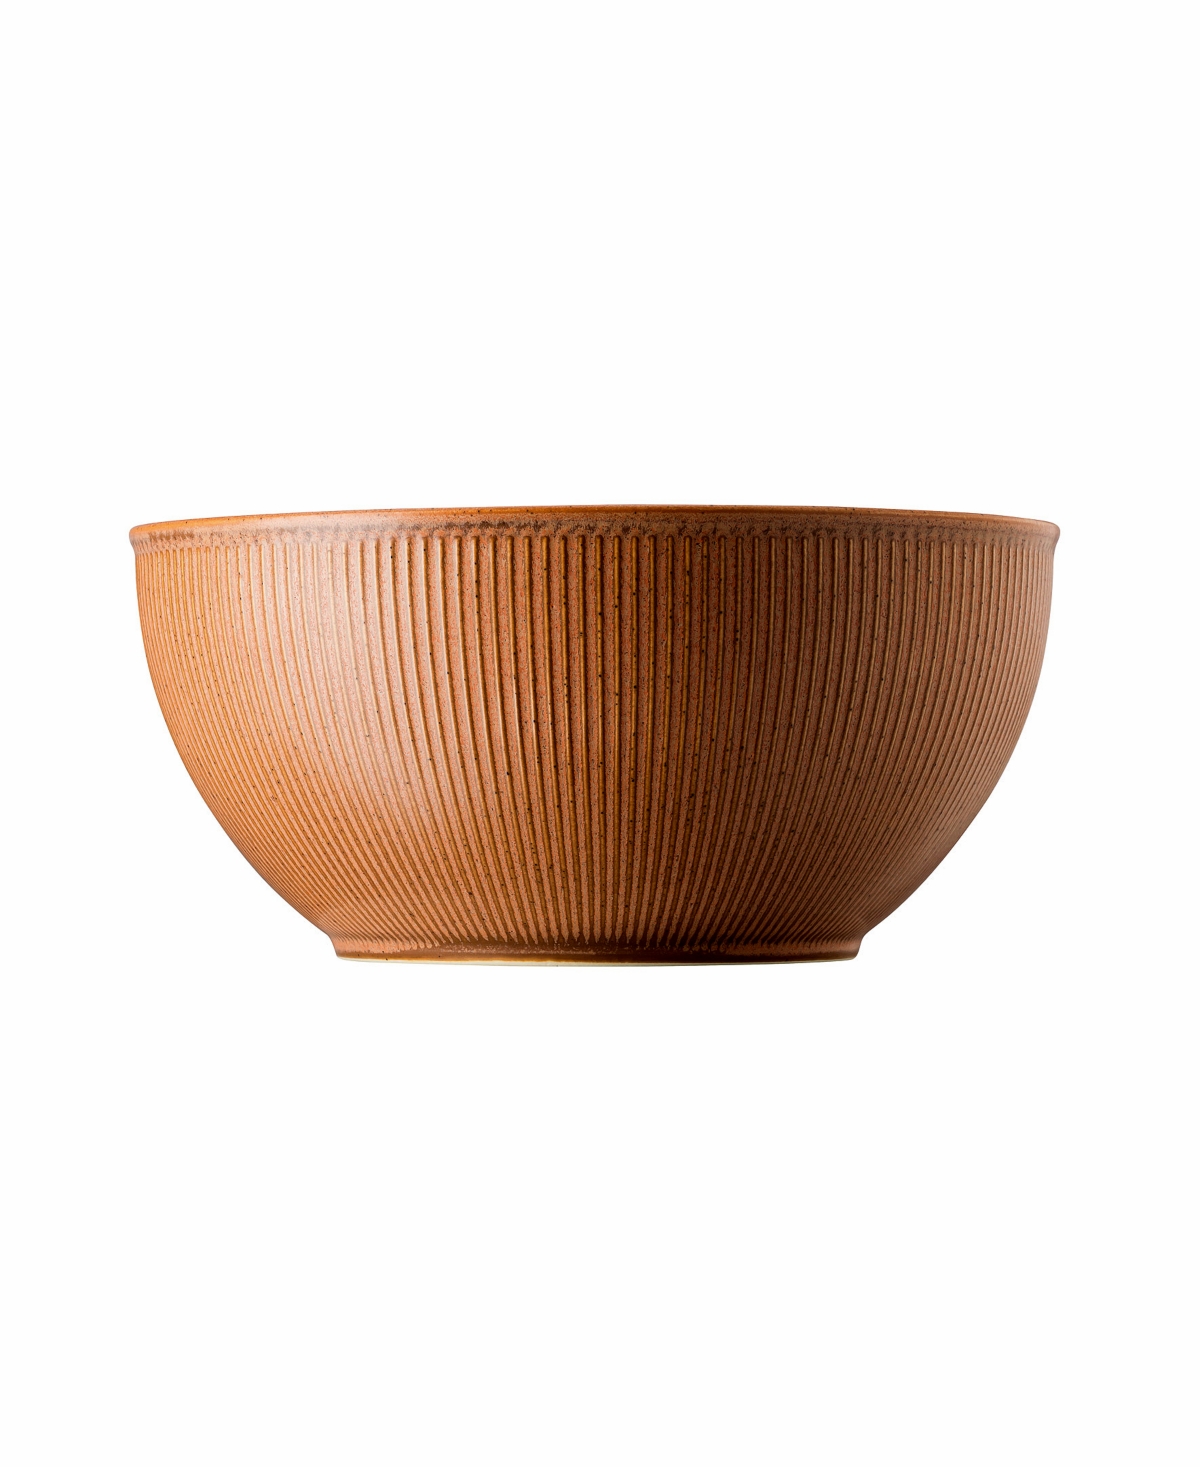 Rosenthal Clay Serve Bowl 9.5" In Earth